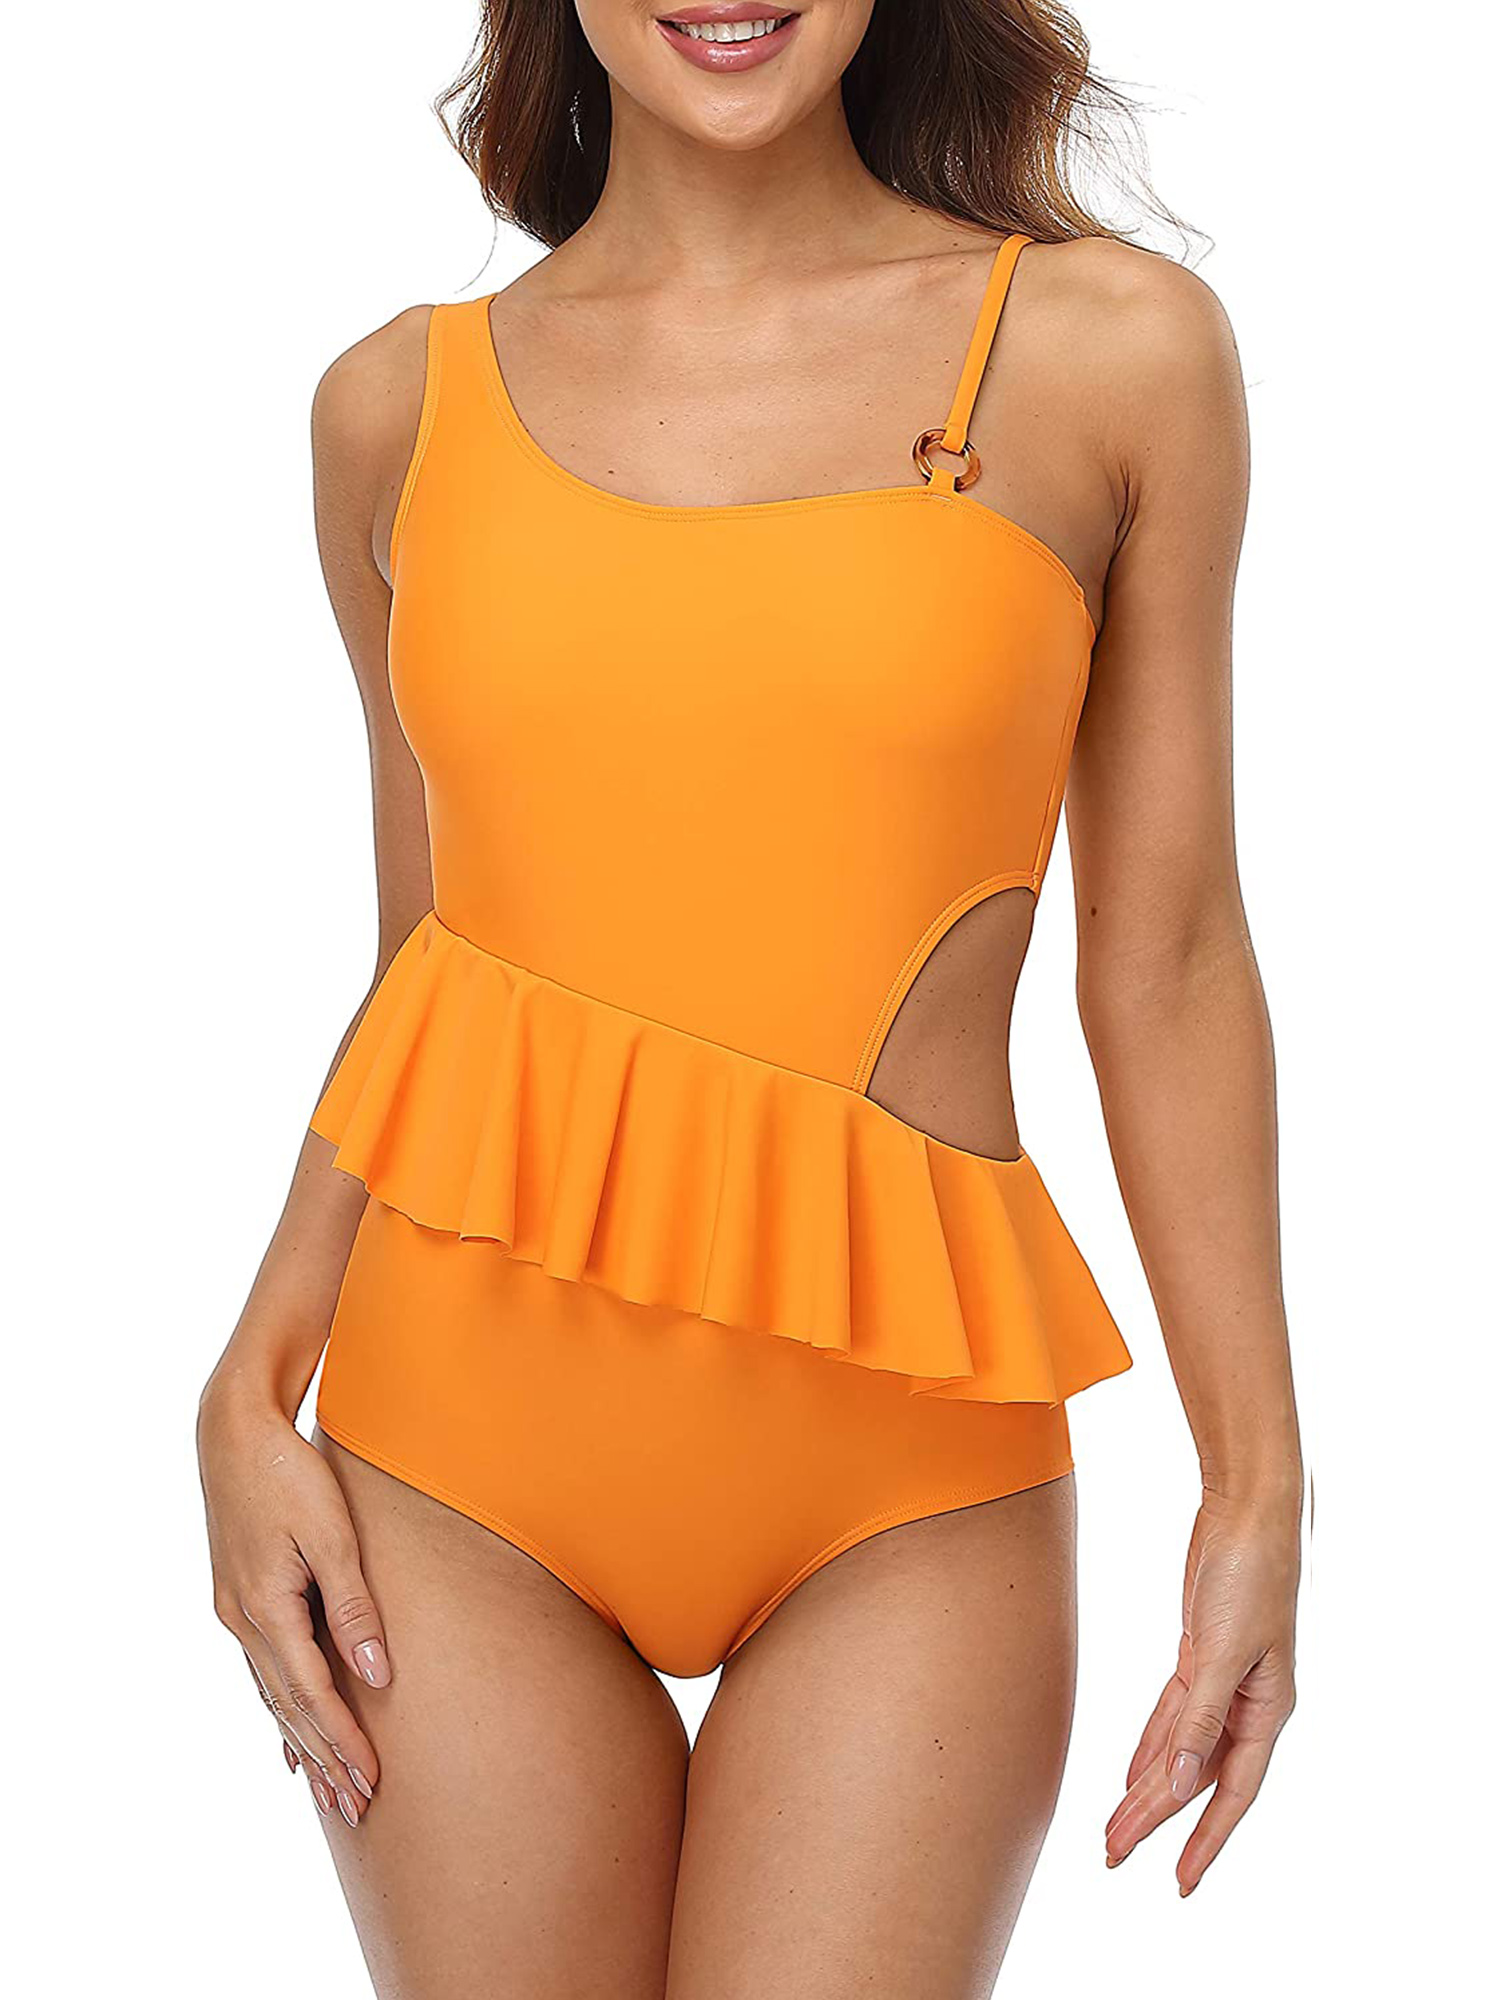 Choose the color orange for your swimsuit!